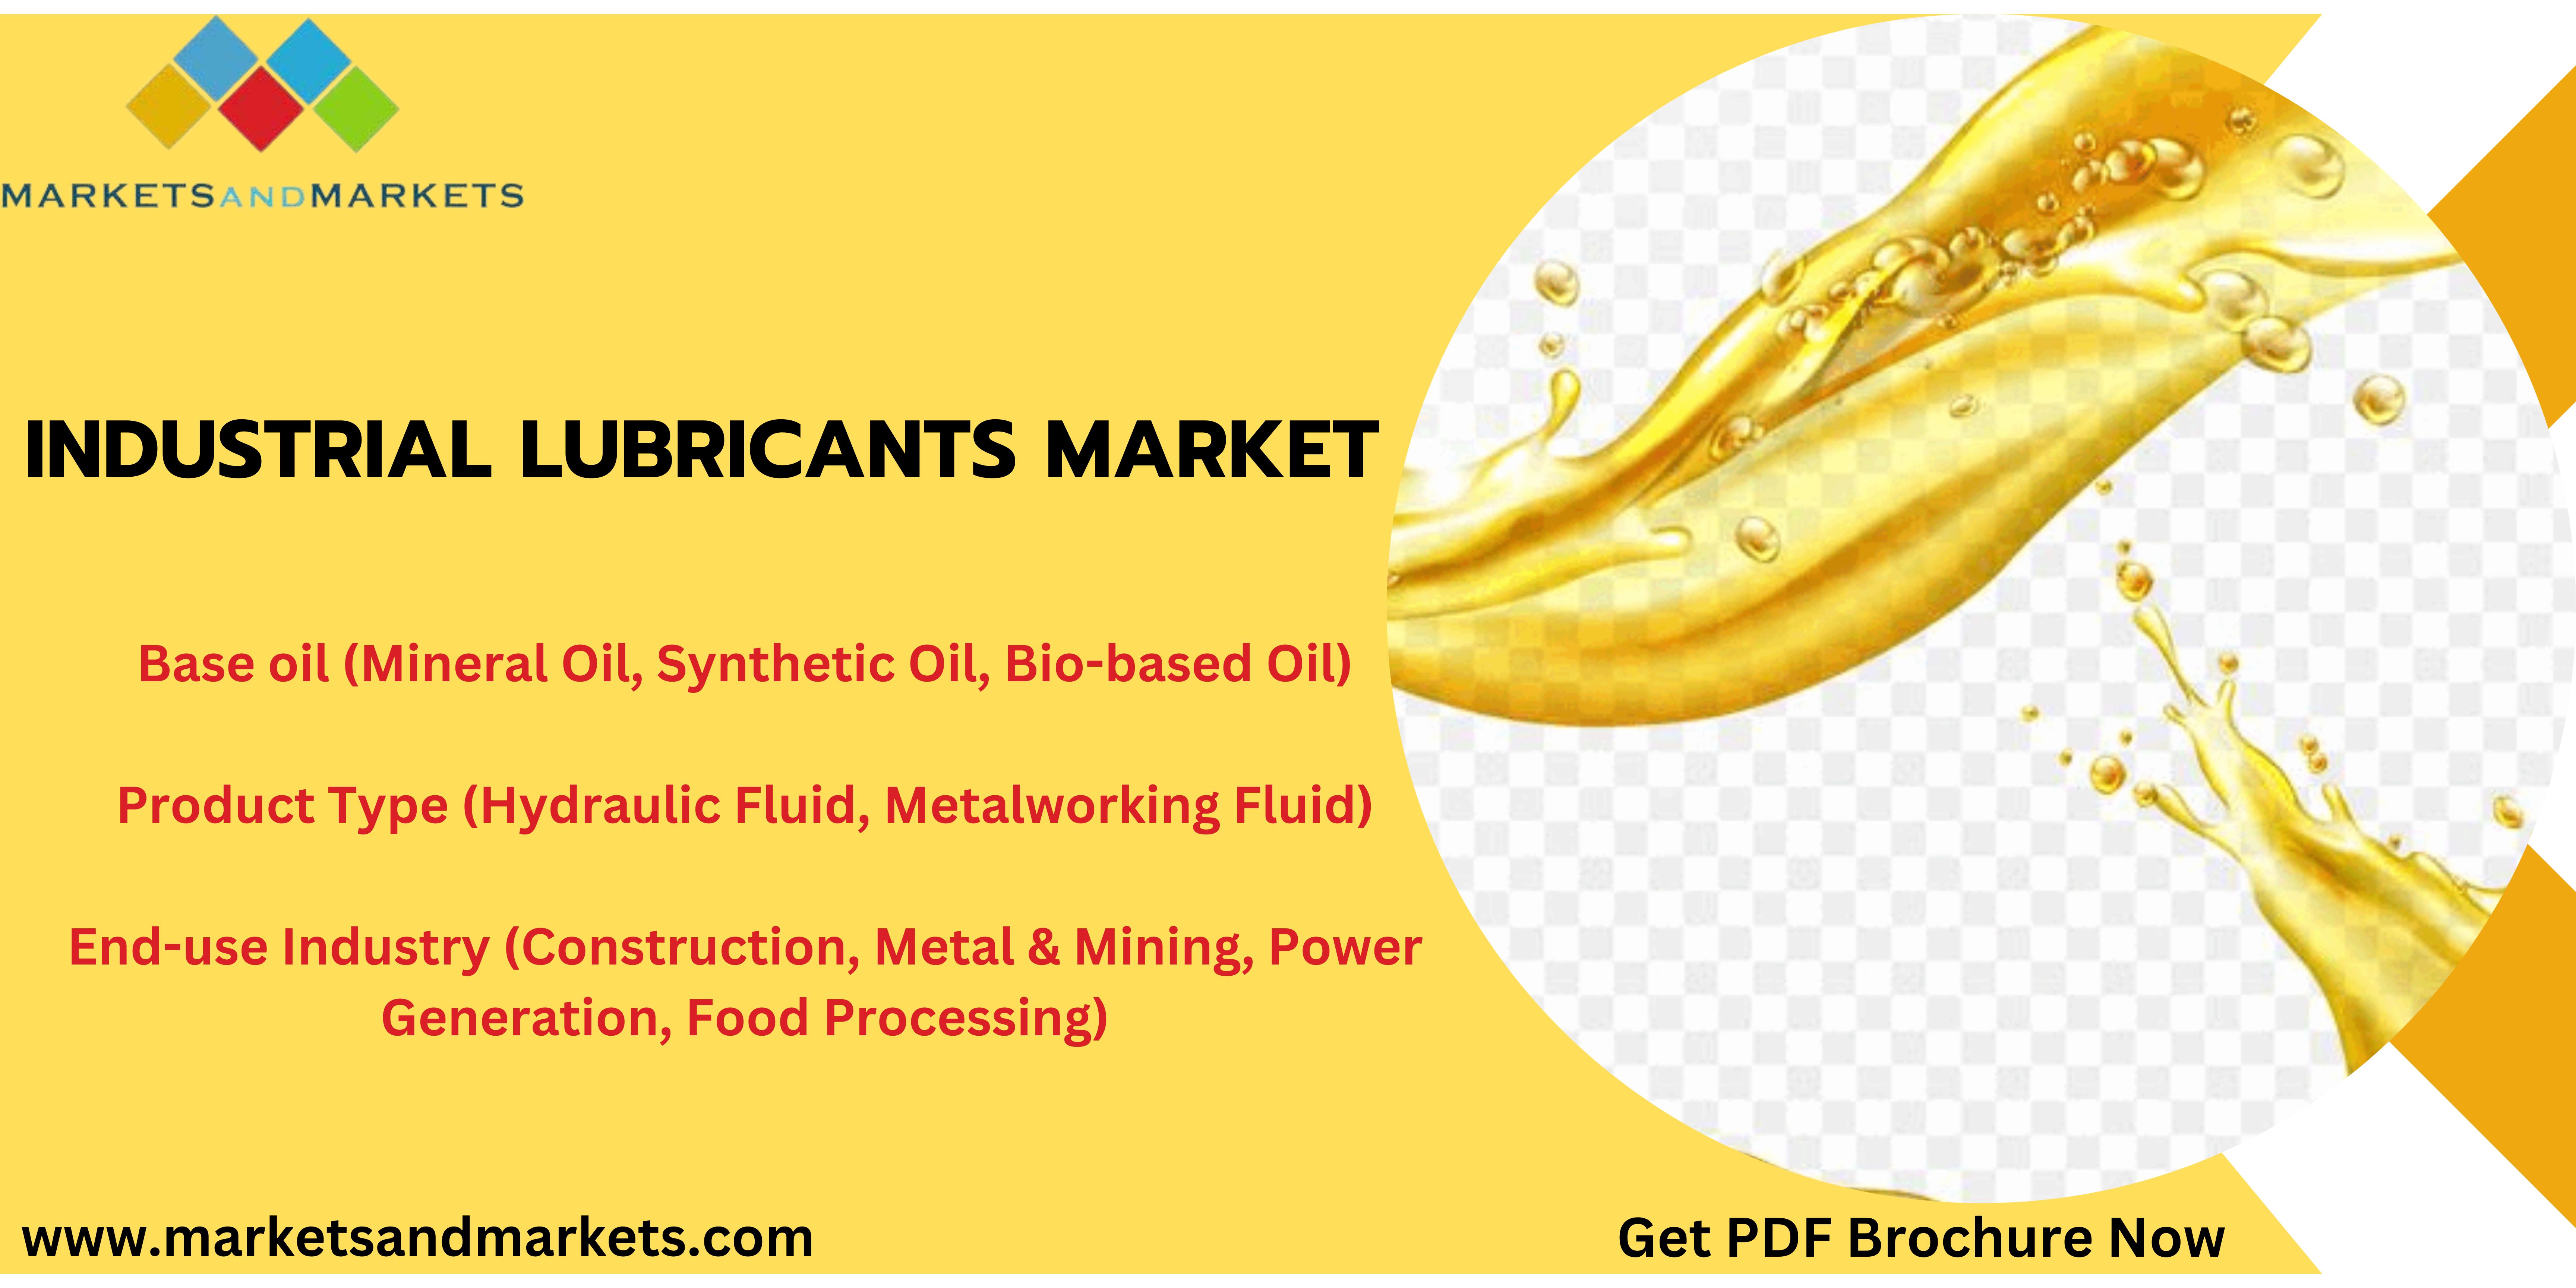 Industrial Lubricants Market Trends, Analysis, Growth, Opportunities with Top Key Players| MarketsandMarkets™